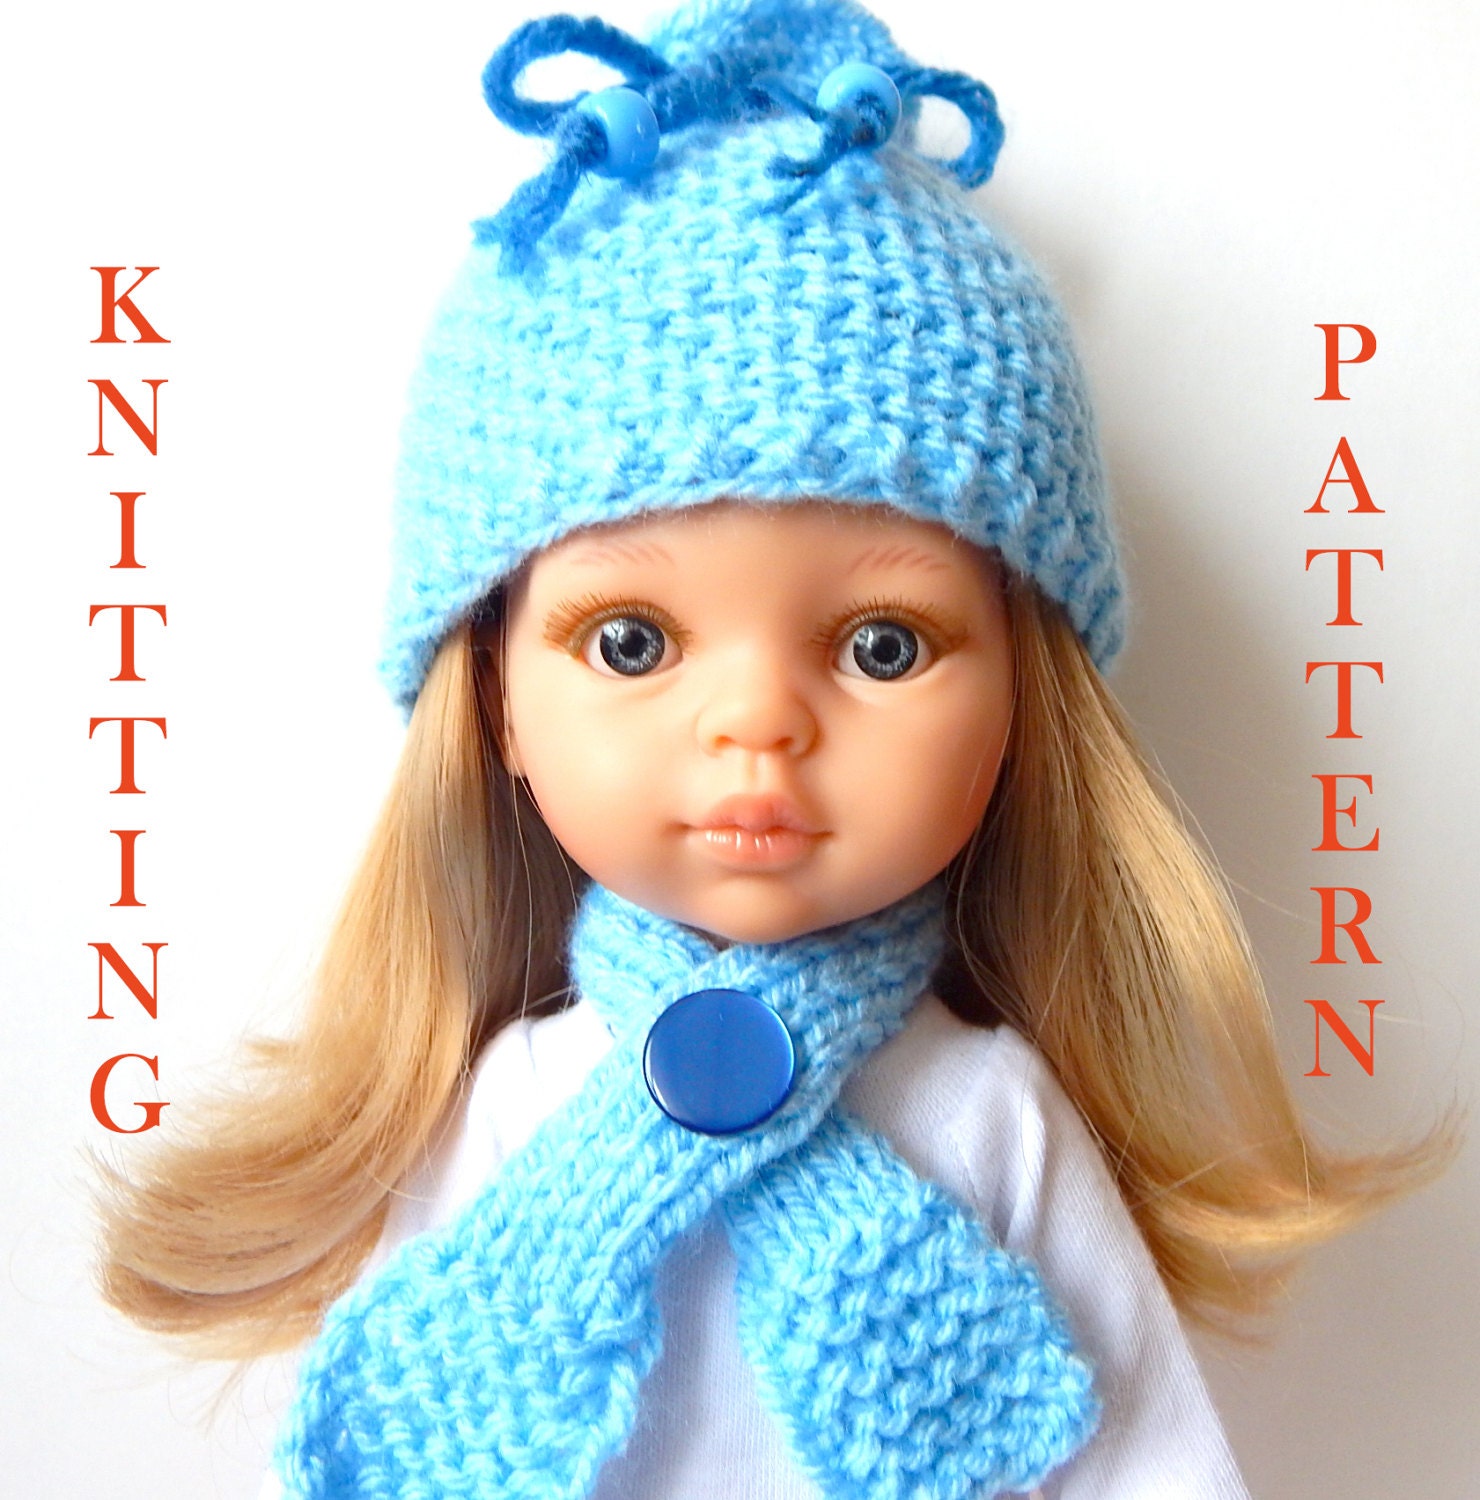 PDF Knitting pattern to knit Dolls clothes to fit 12 13 ...